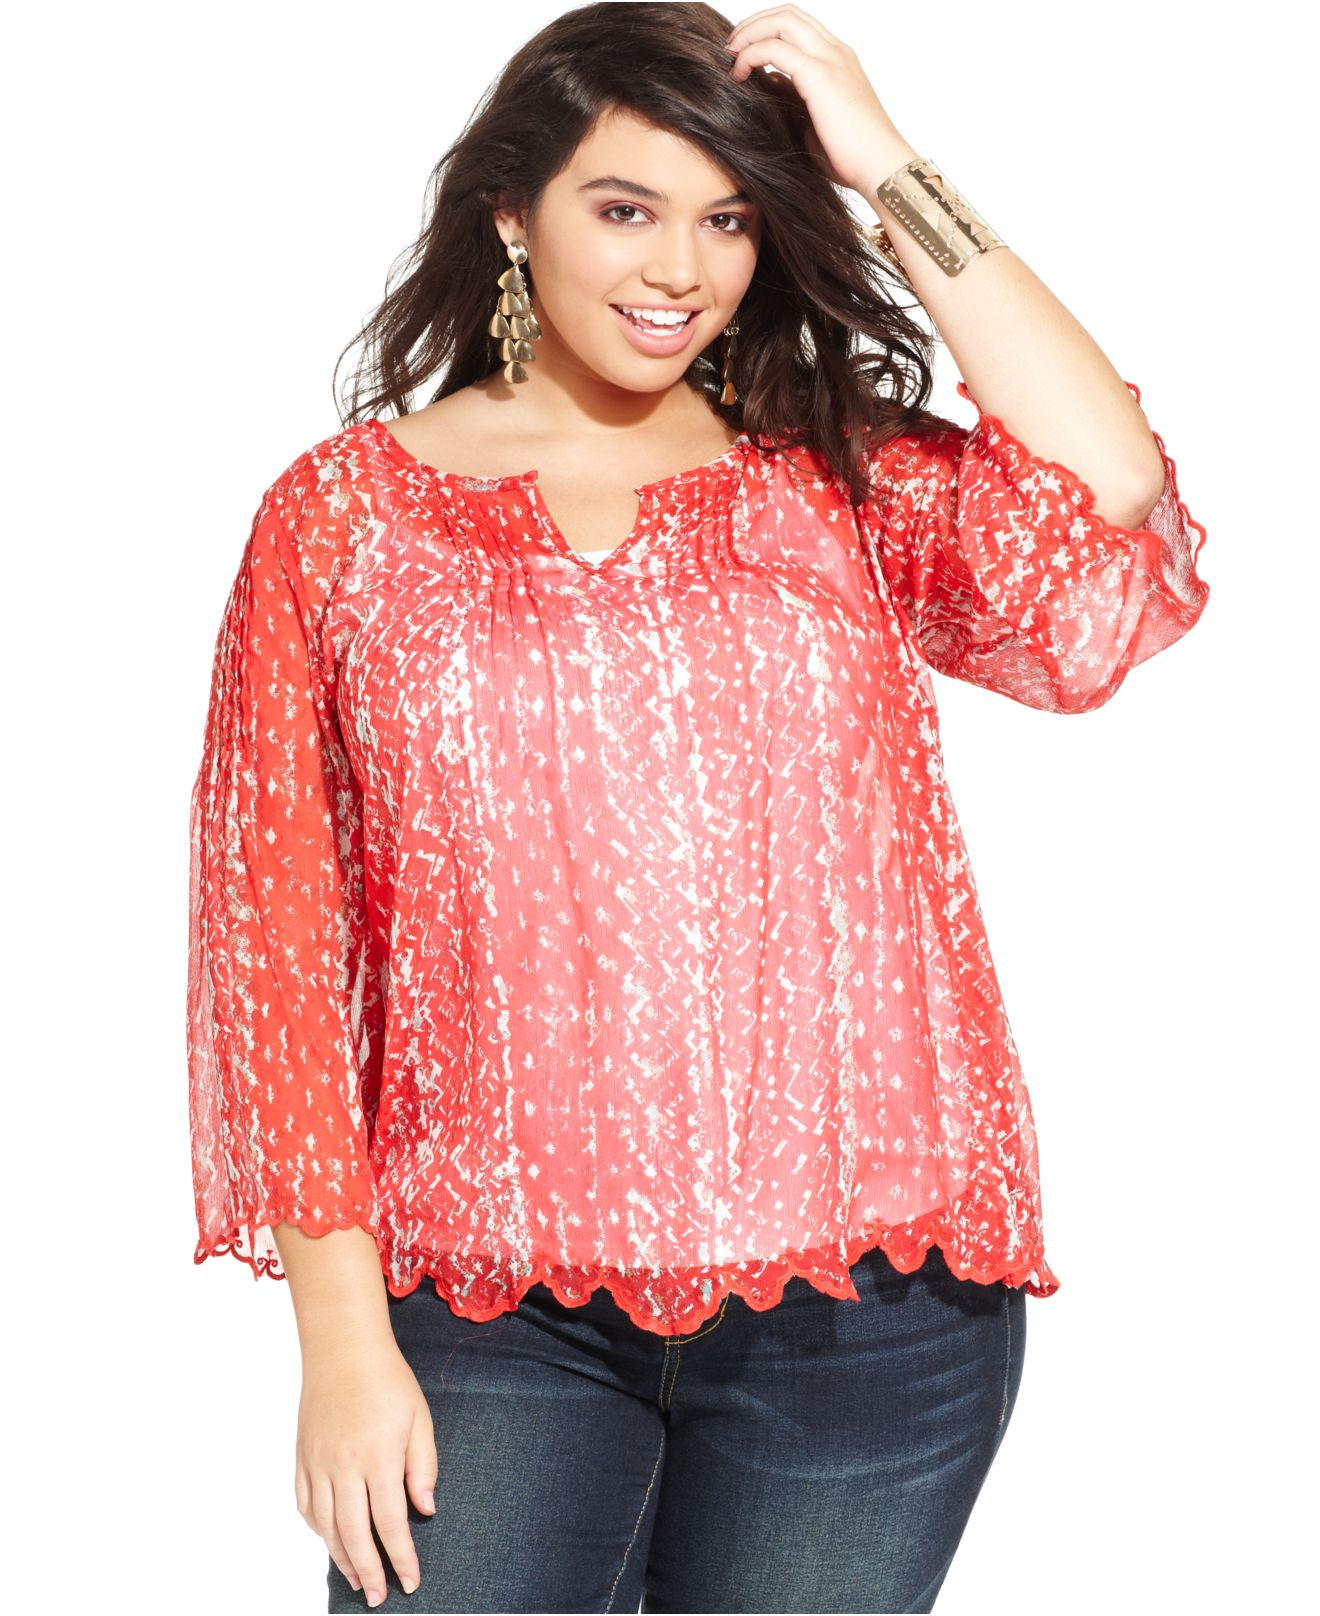 Red Gingham Peasant Blouse Plus Size - Smart Casual Blouse